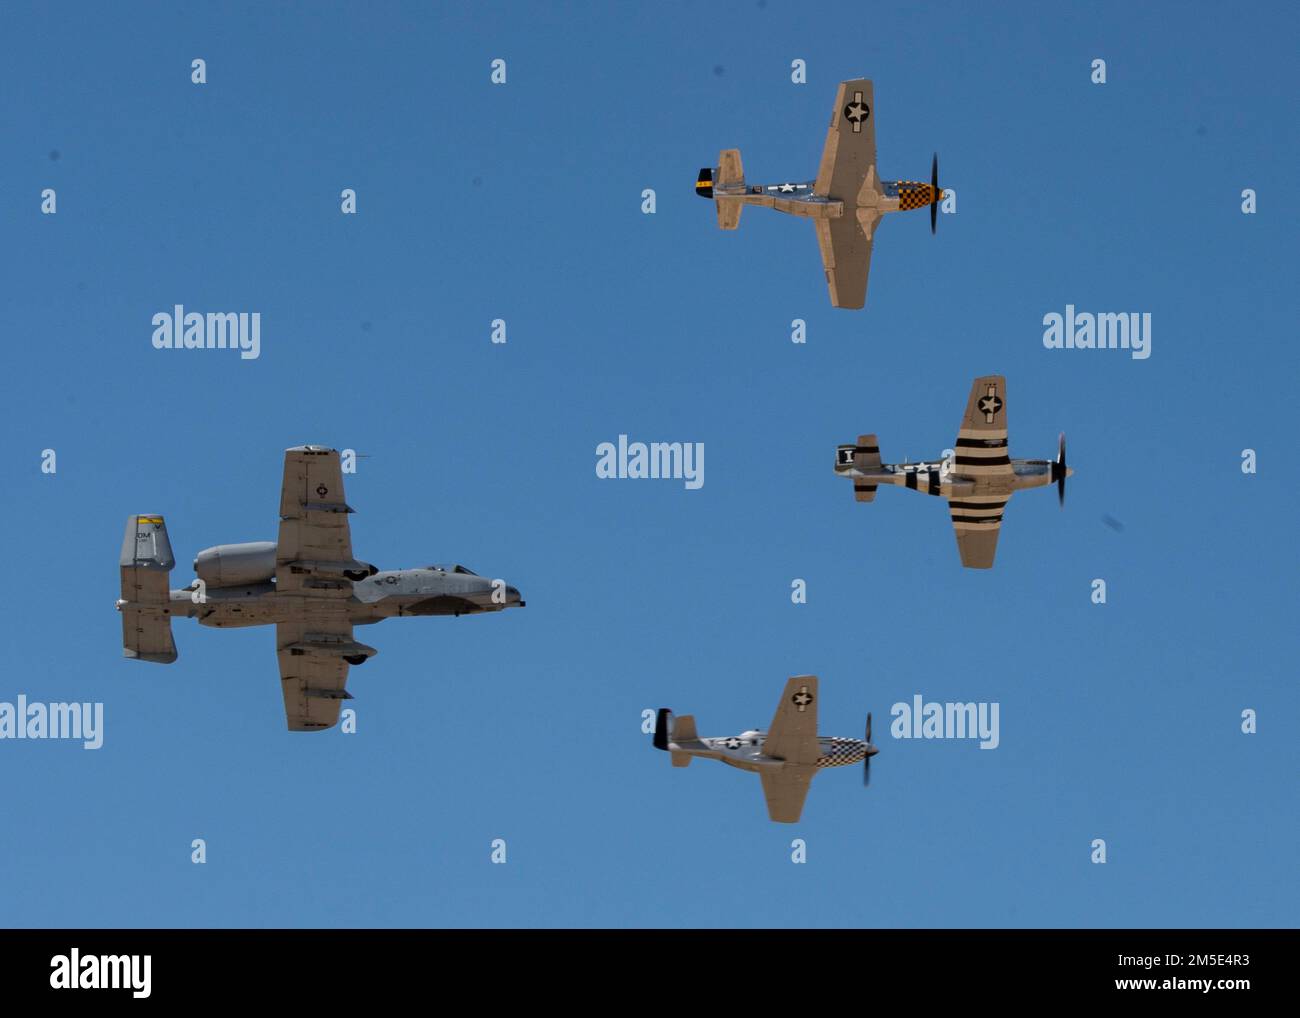 U.S. Air Force Maj. Haden 'Gator' Fullum, A-10 Thunderbolt II Demonstration Team pilot and commander, flies in a four-ship formation alongside 3 P-51 Mustangs during Heritage Flight Training Course at Davis-Monthan Air Force Base, Arizona, March 6, 2022. During the event, civilian warbird pilots and current Air Force demonstration pilots trained together ahead of the 2022 air show season. Stock Photo